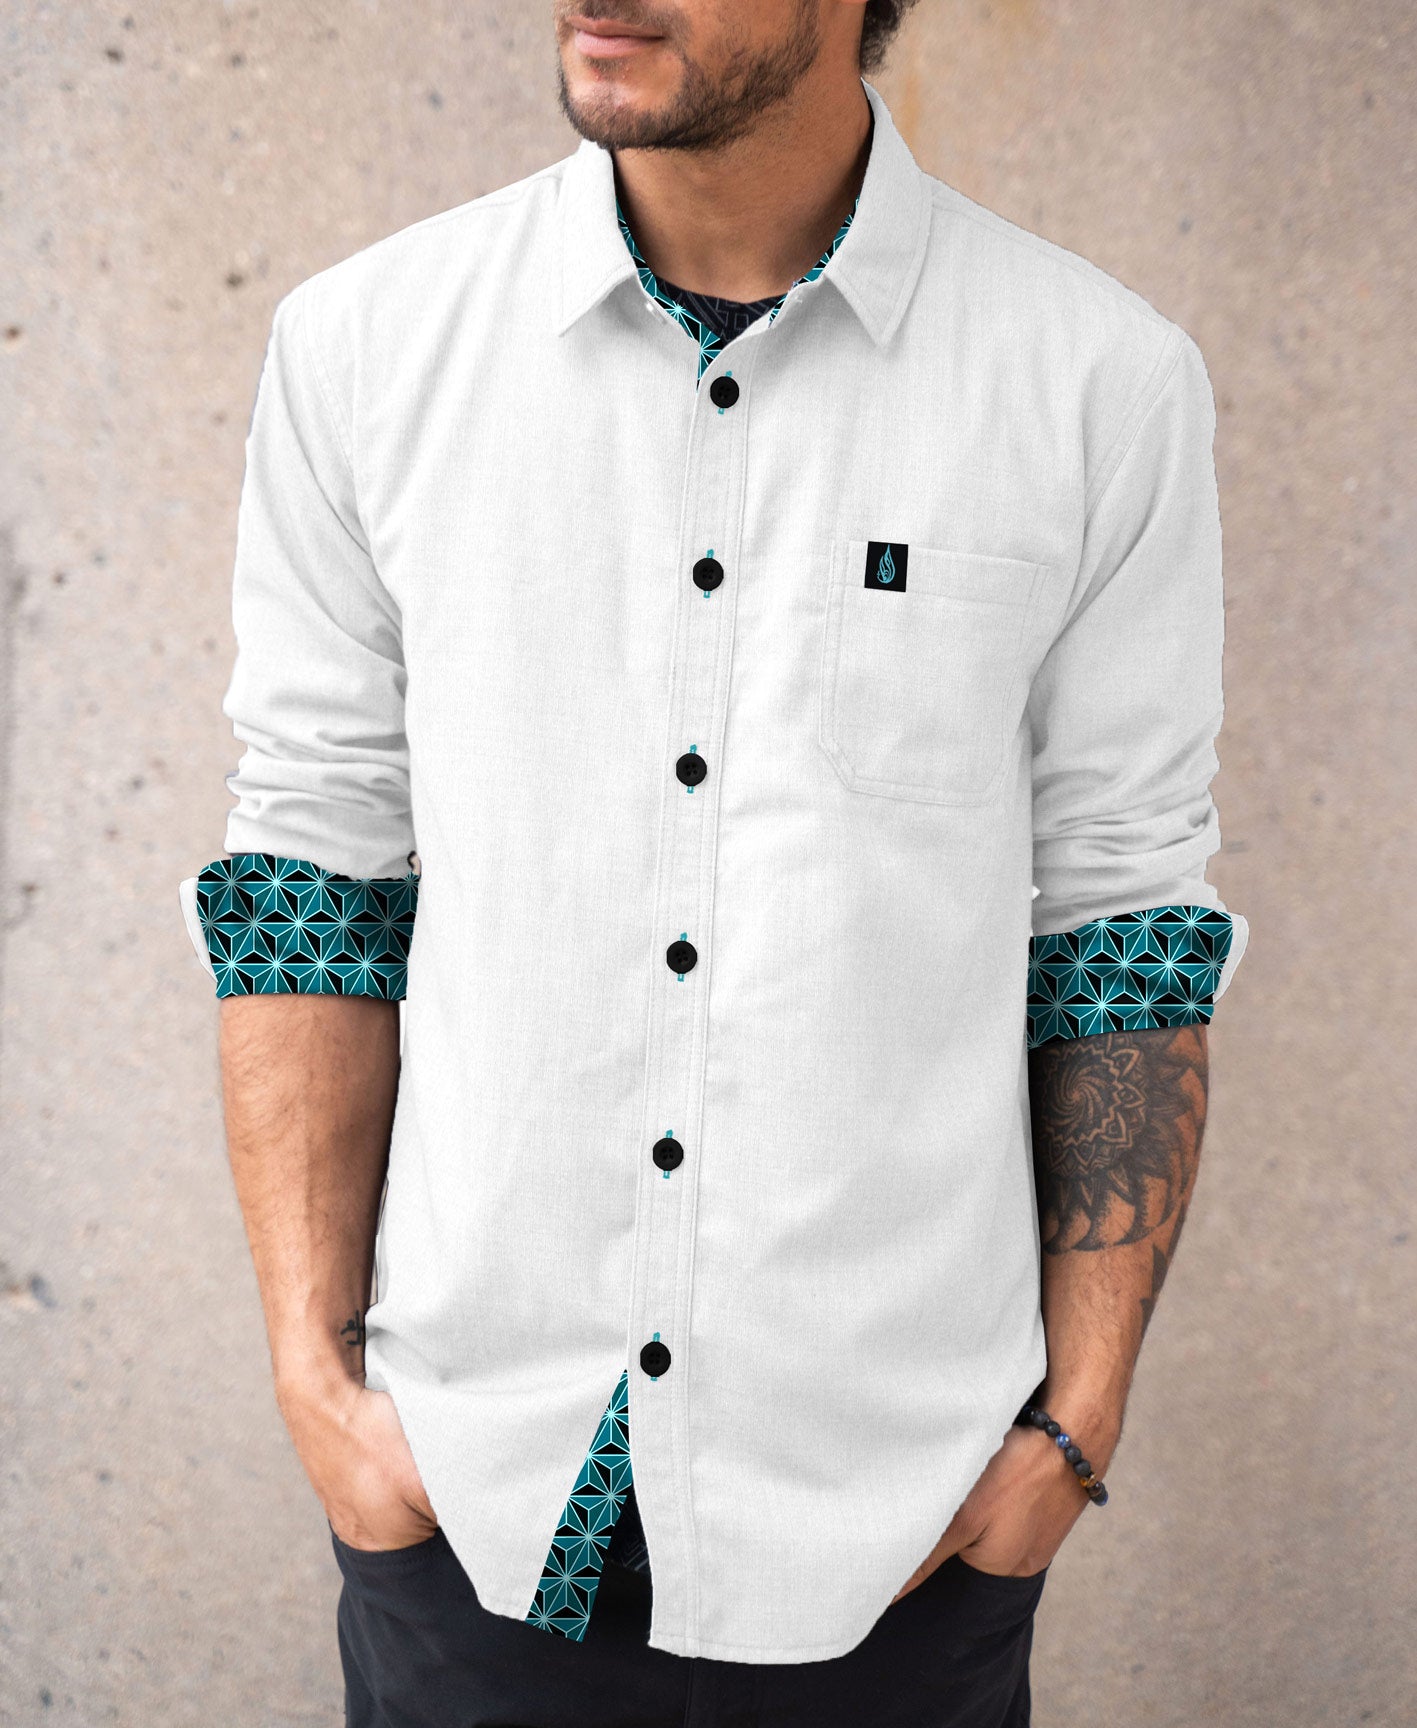 Northern Lights Lined Button Down Shirt by Threyda - Ships April